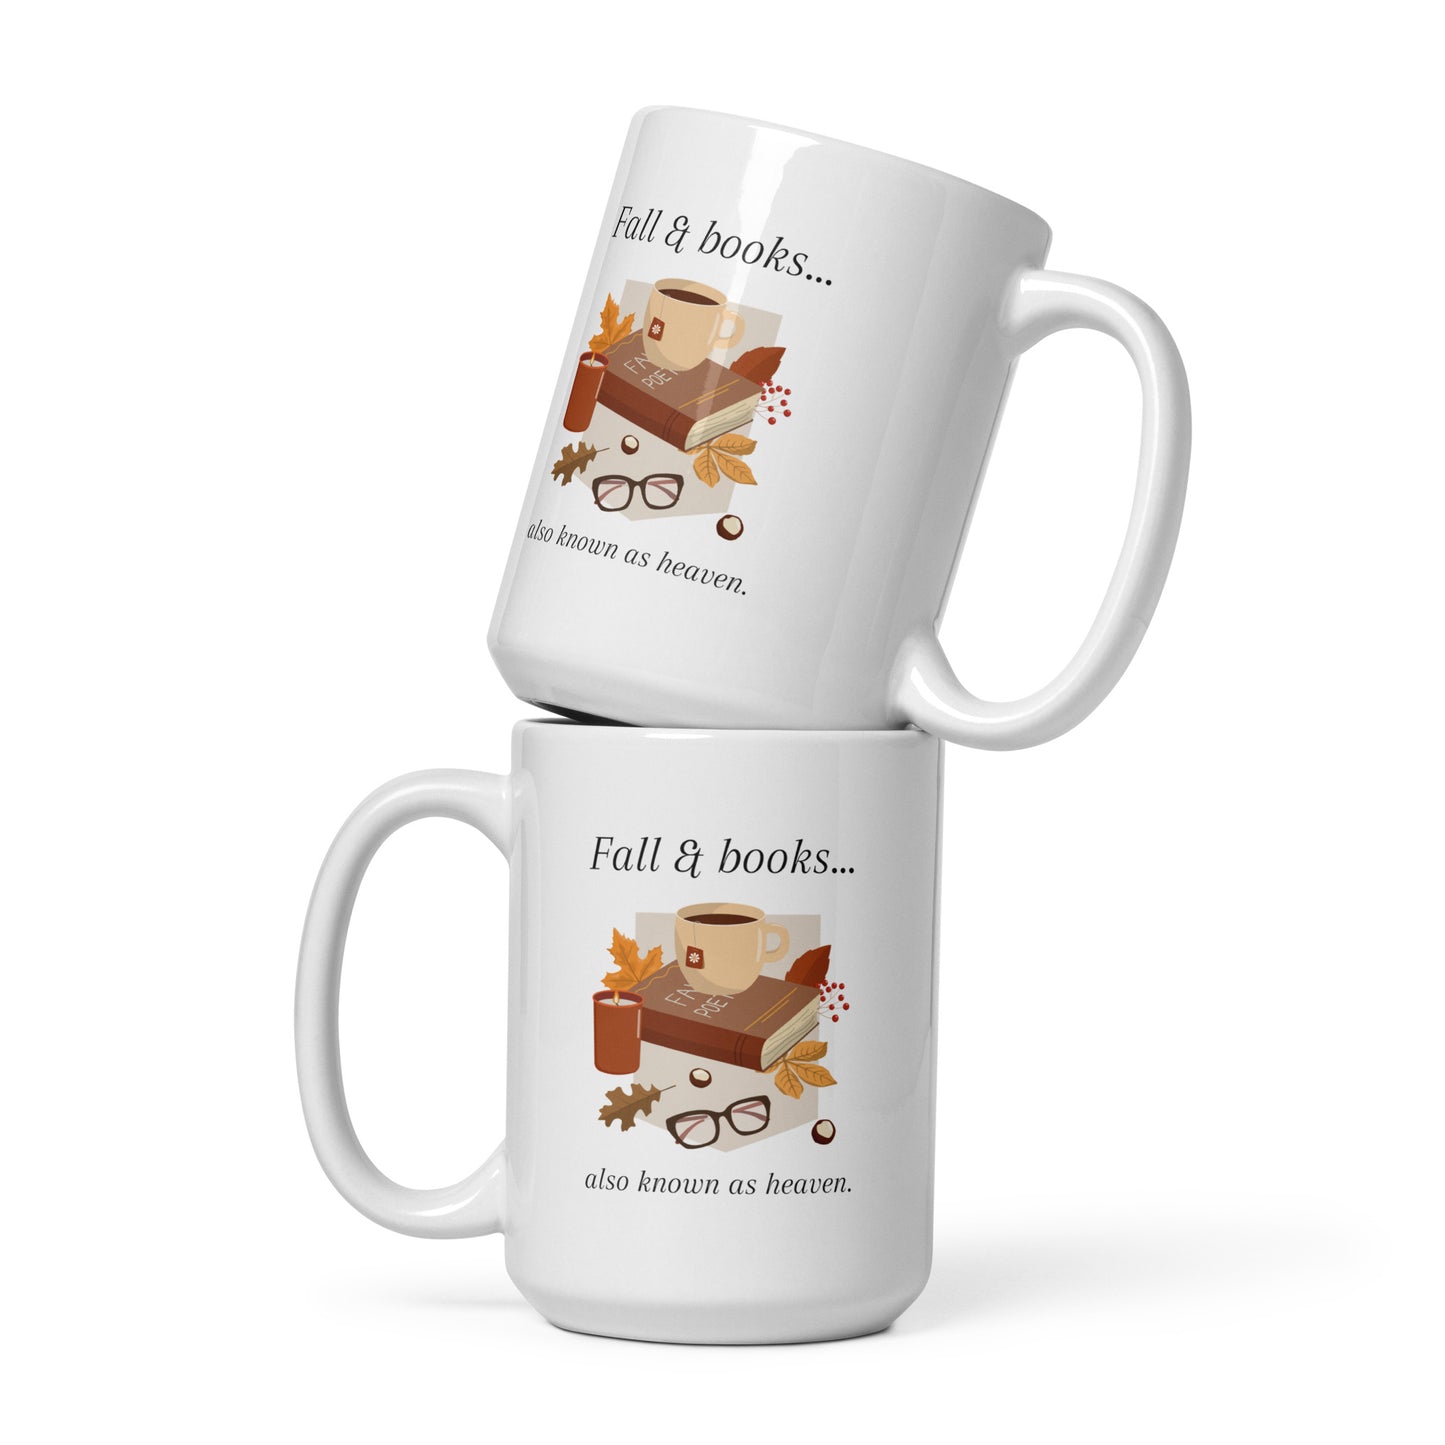 "Fall & books... also known as heaven" White Glossy Mug